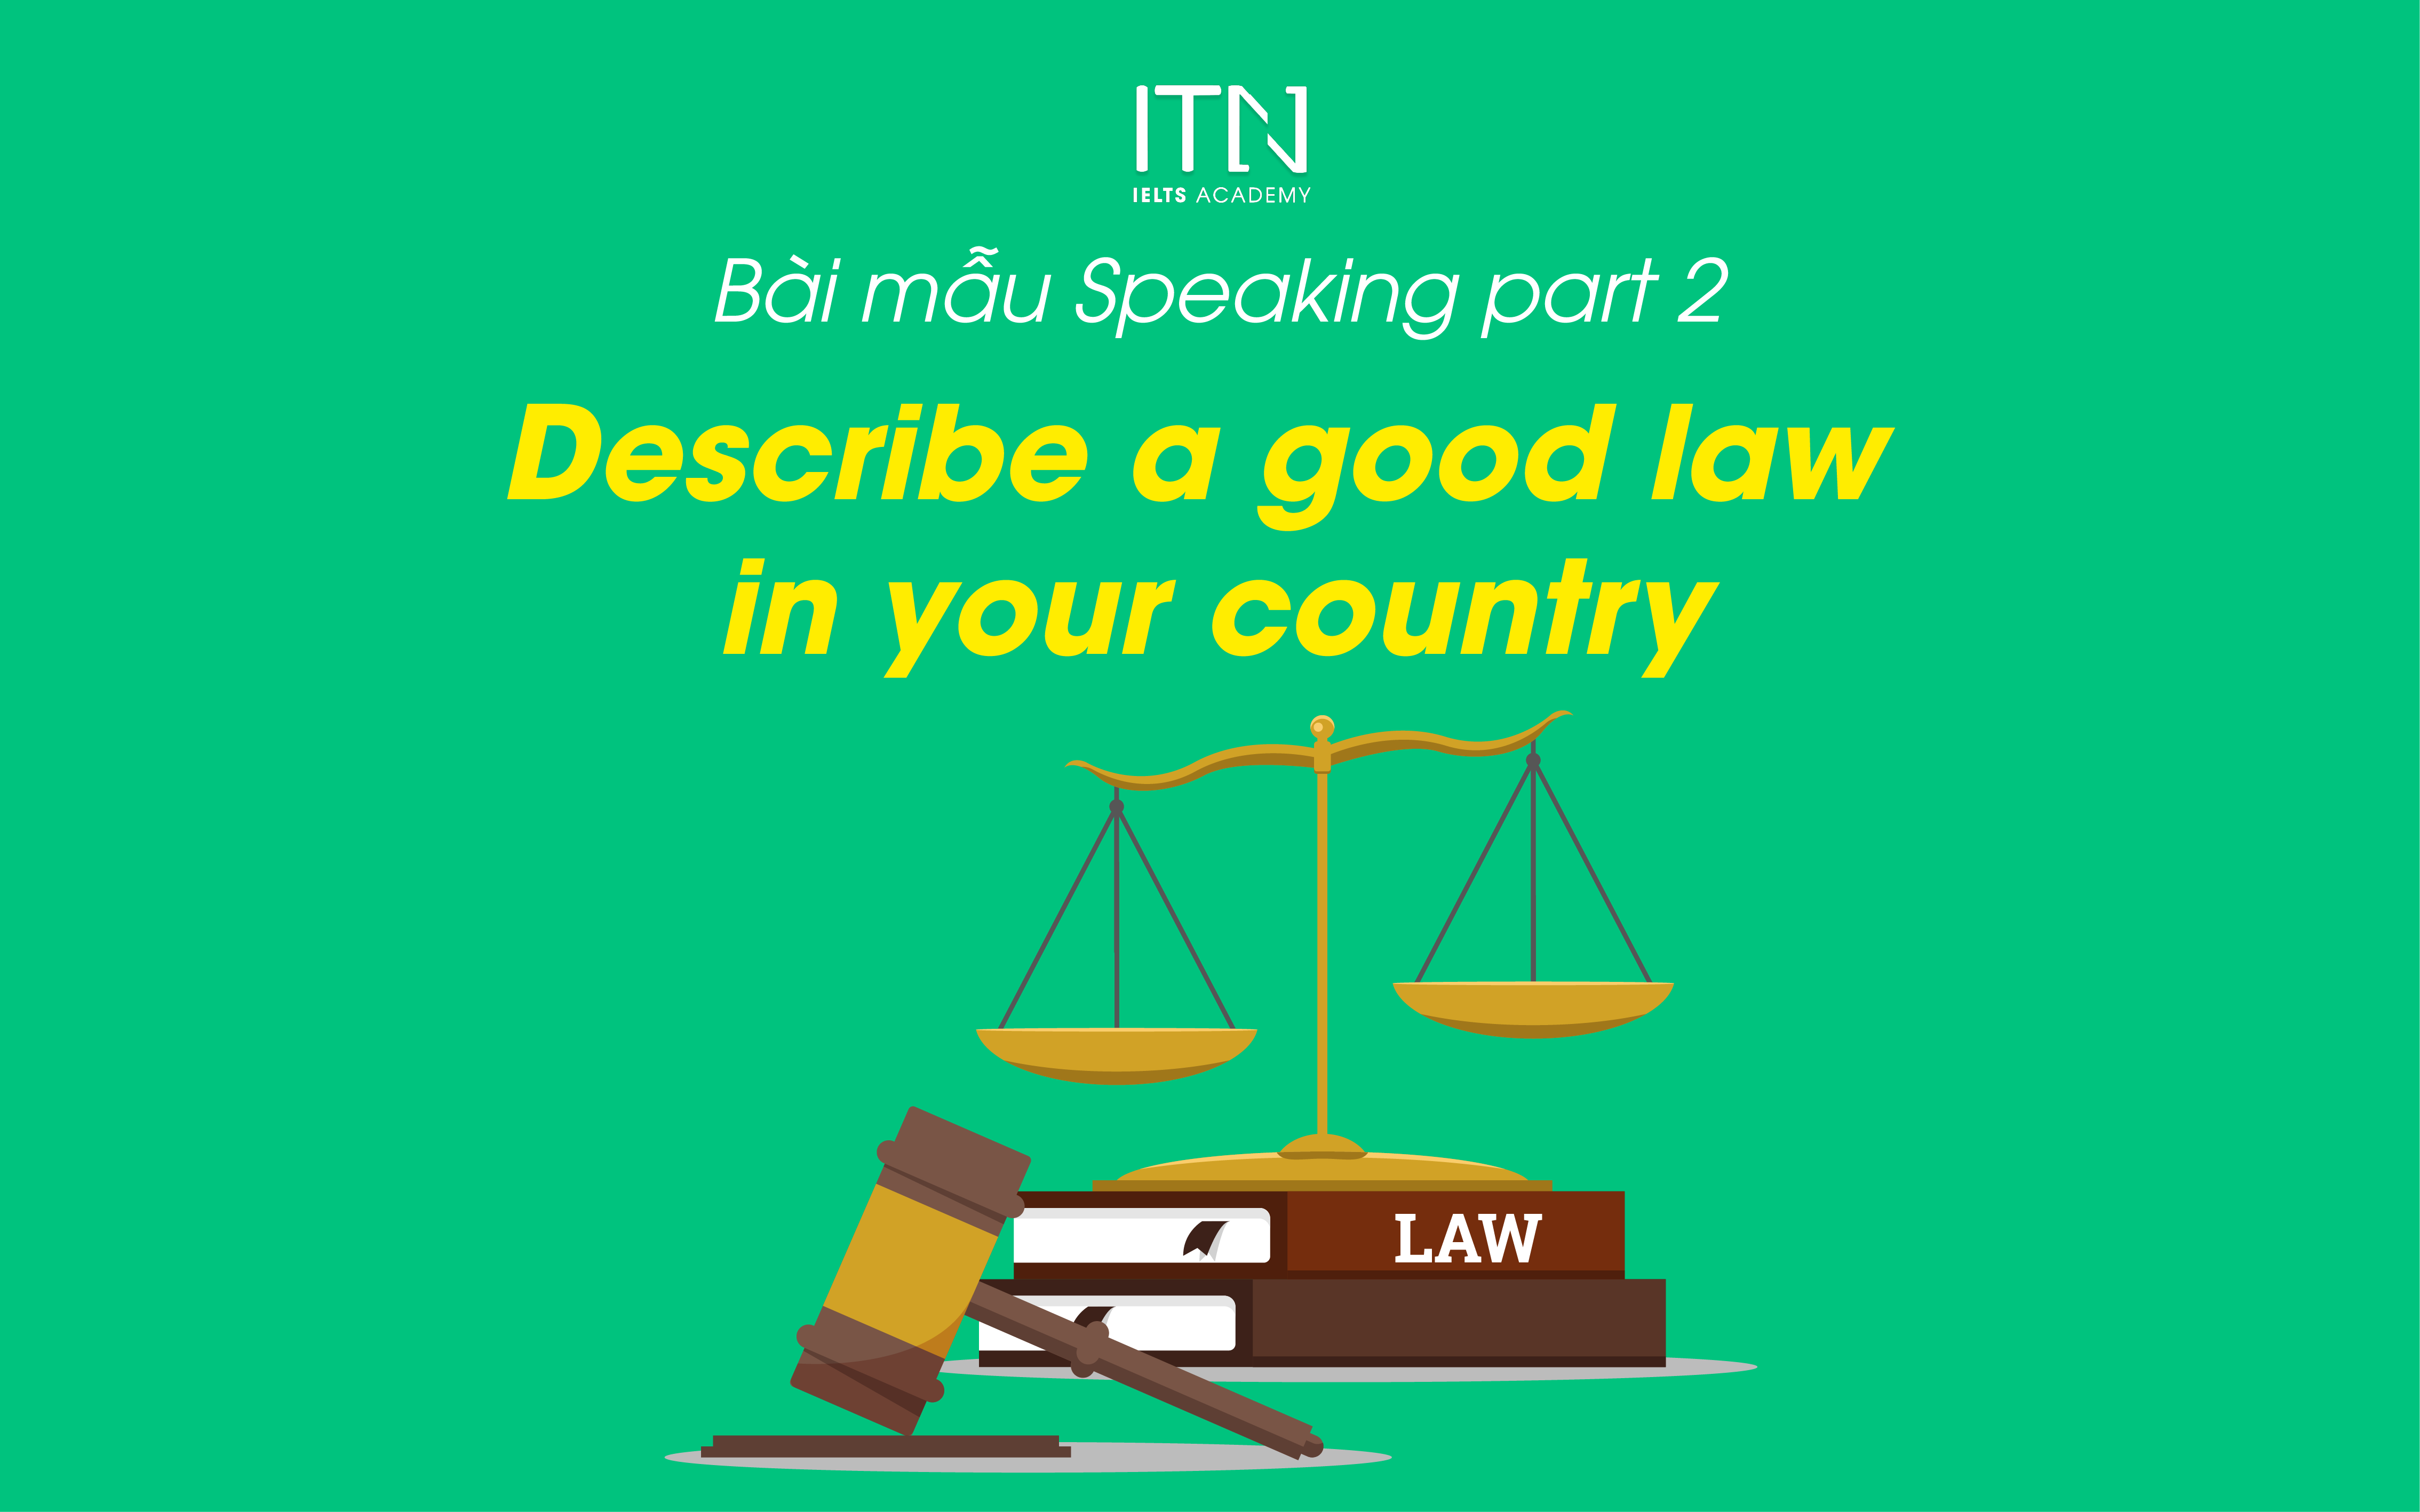 Describe A Good Law In Your Country - Bài Mẫu Speaking Part 2 